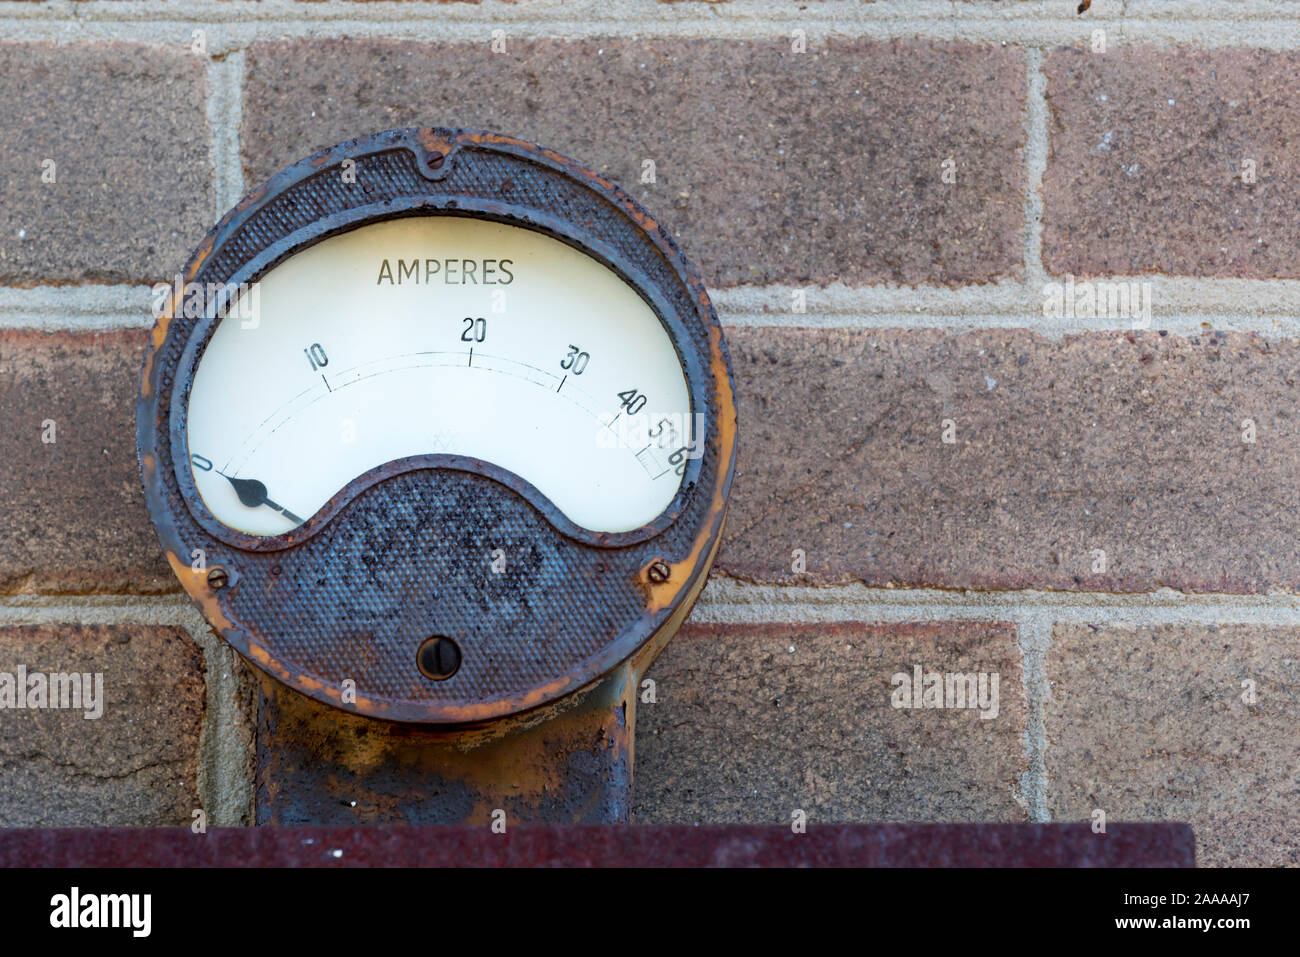 A rusting antique amp meter showing Amperes using a needle mounted outside on a brick wall Stock Photo